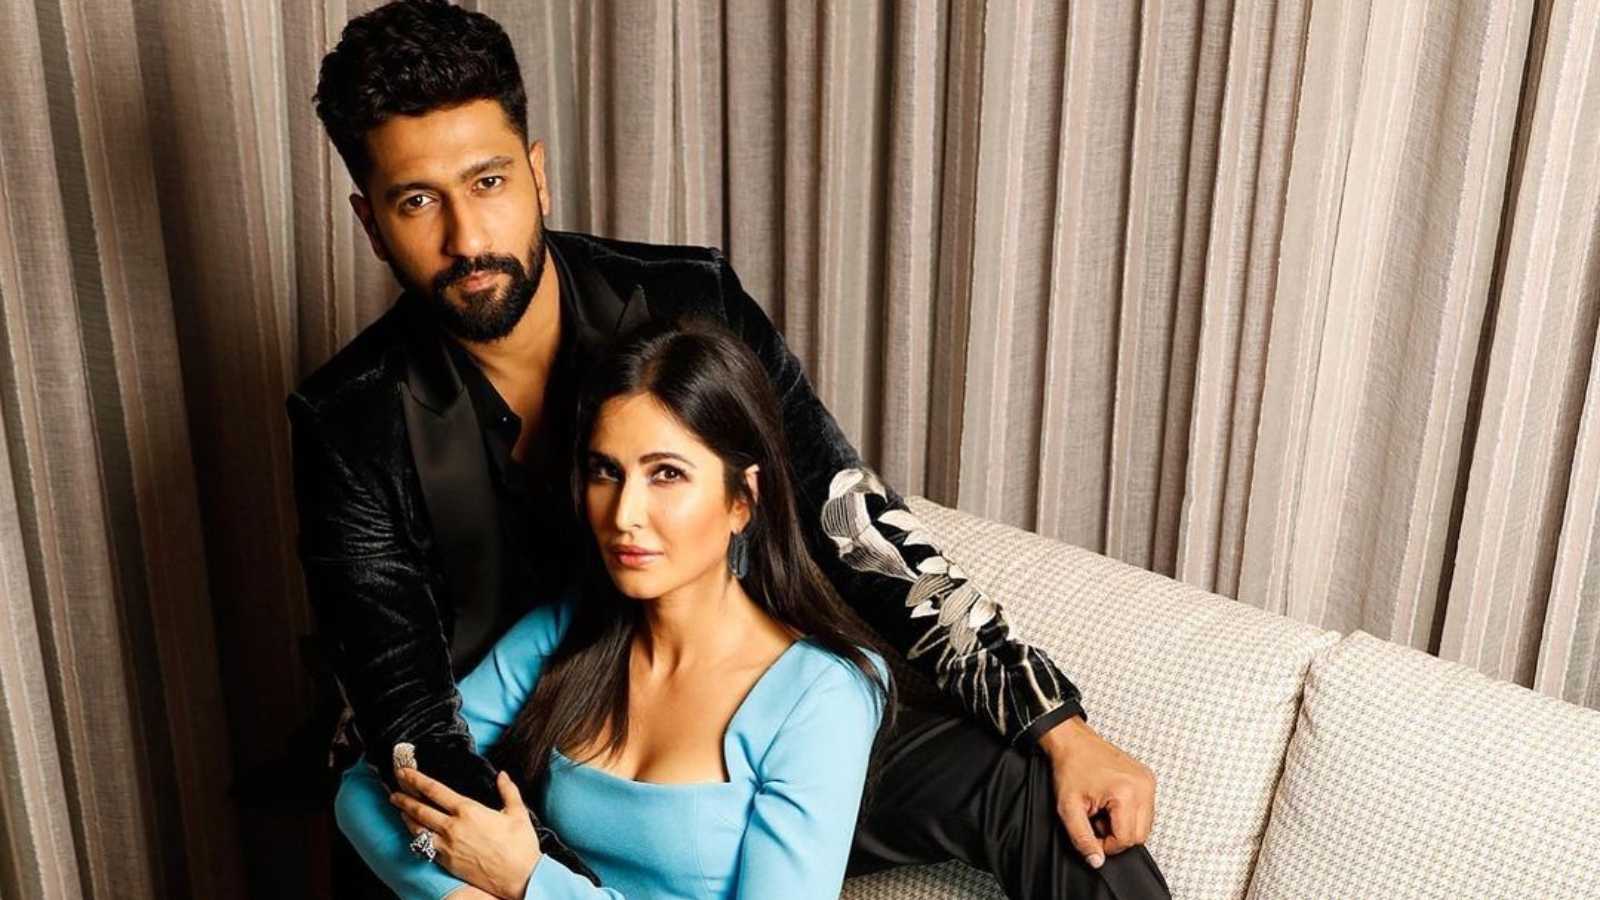 Vicky Kaushal had the sweetest description for his marriage to Katrina Kaif which will tug your VicKat heartstrings